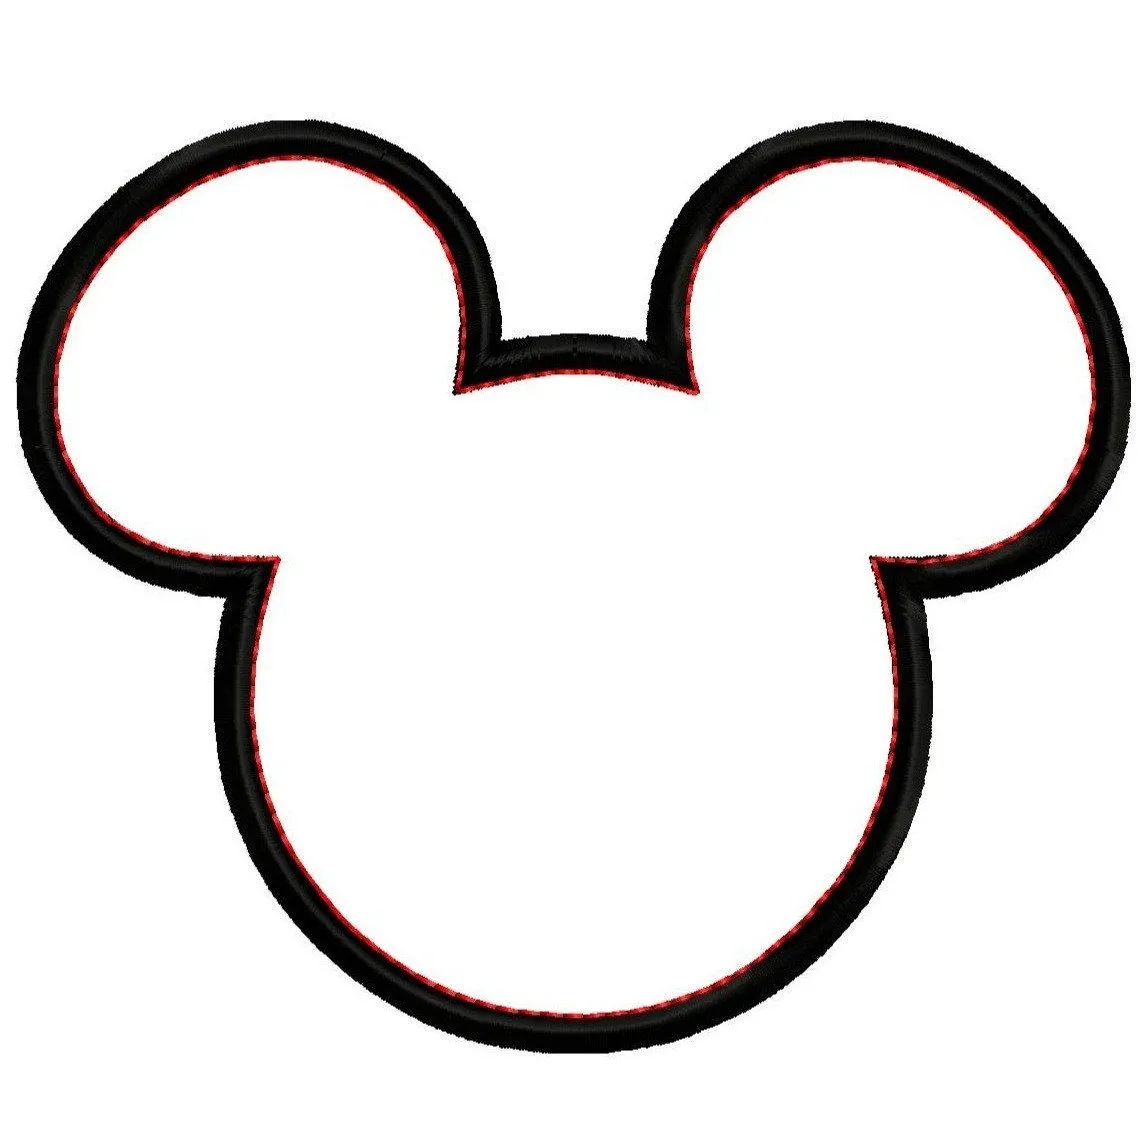 Mickey Mouse Head Silhouette | Clipart Panda - Free Clipart Images